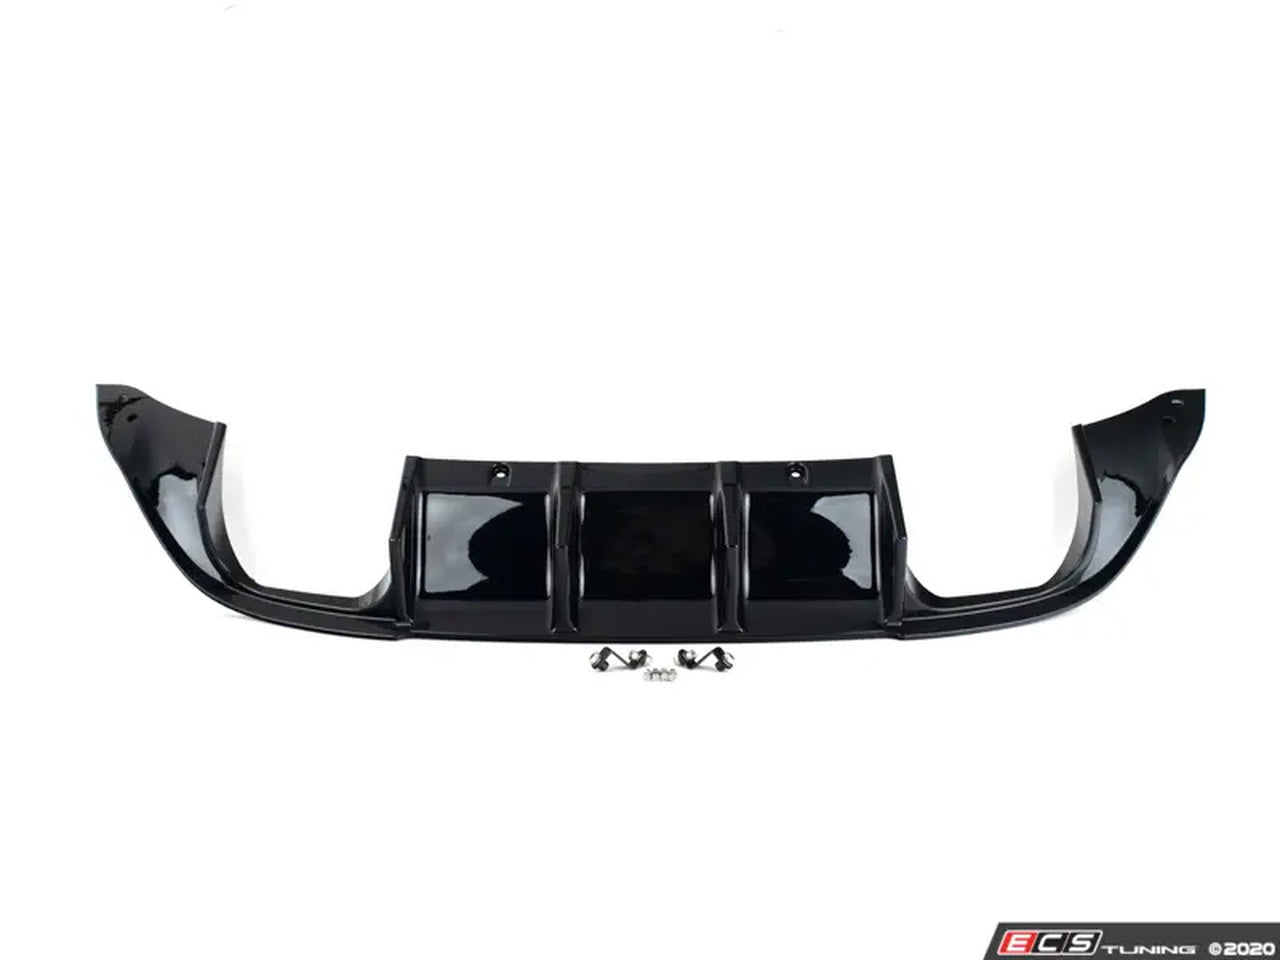 Bodykit front spoiler diffuser sill ABS for VW Golf 7 GTI TCR carbon look